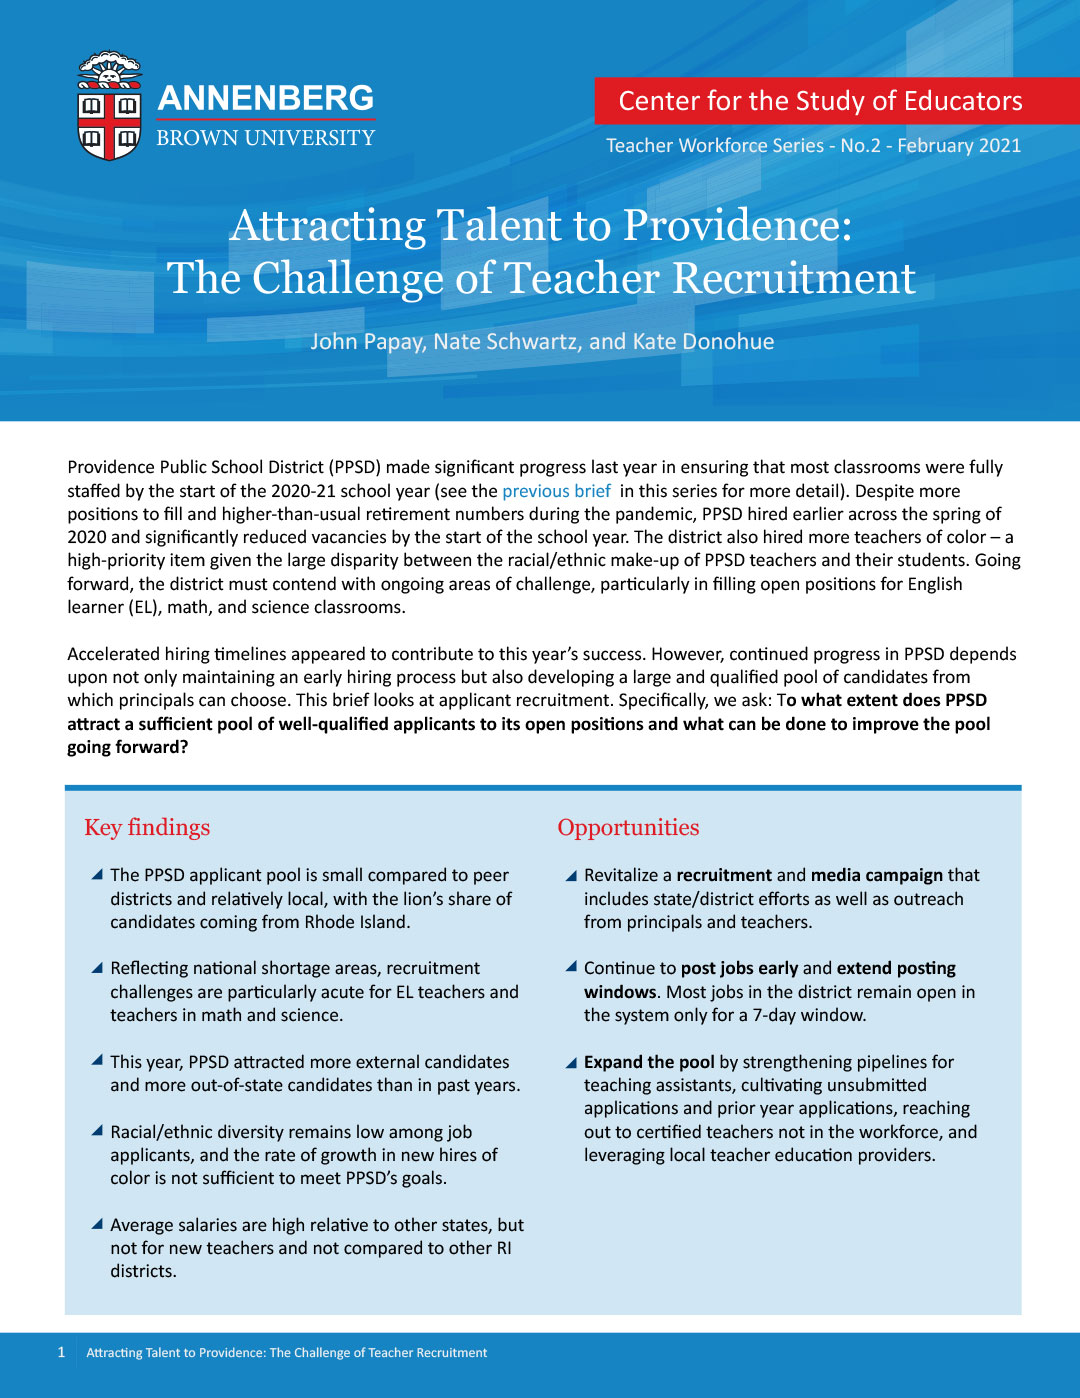 Attracting Talent to Providence: The Challenge of Teacher Recruitment